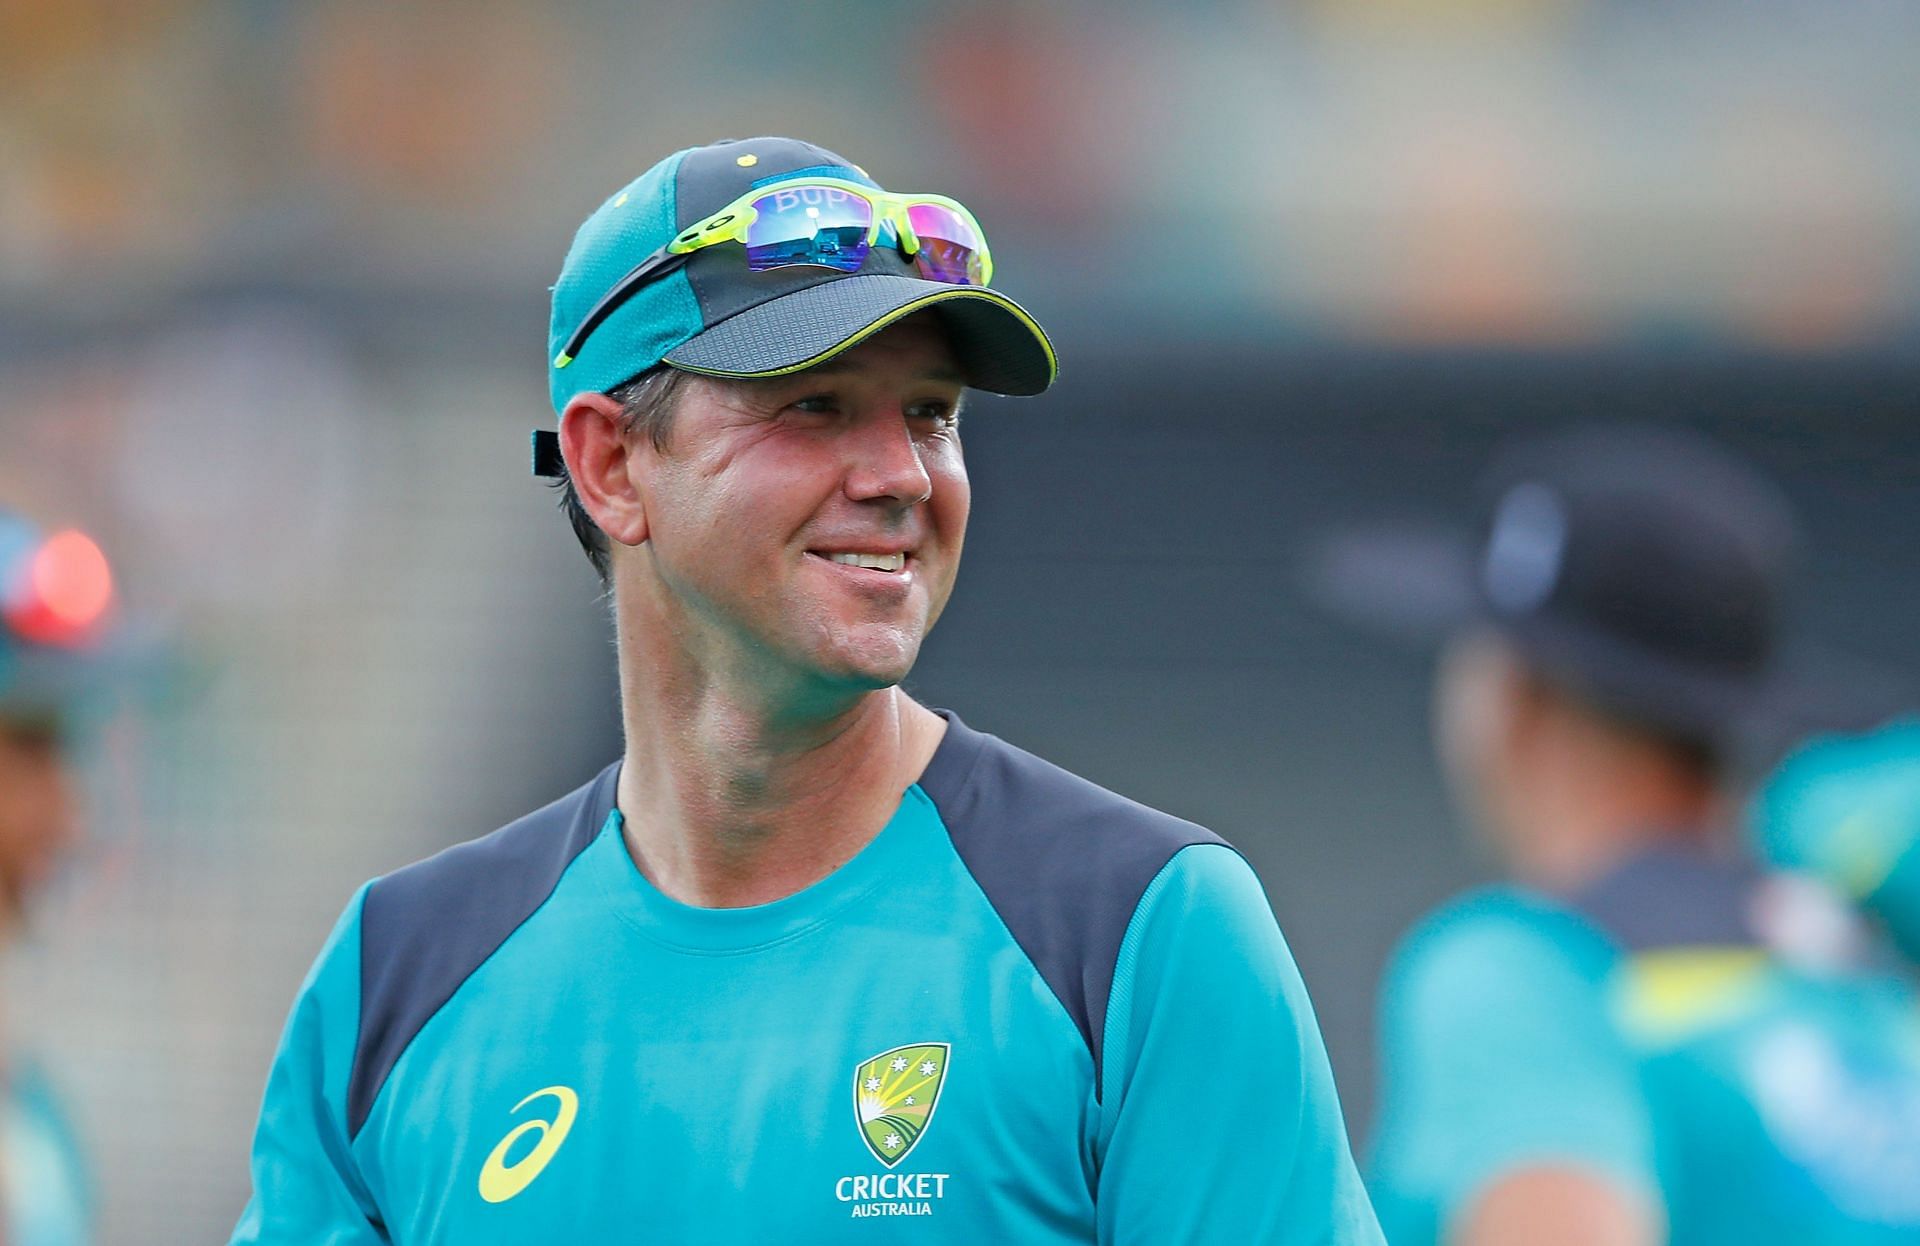 Ricky Ponting (Image Credits: Twitter)